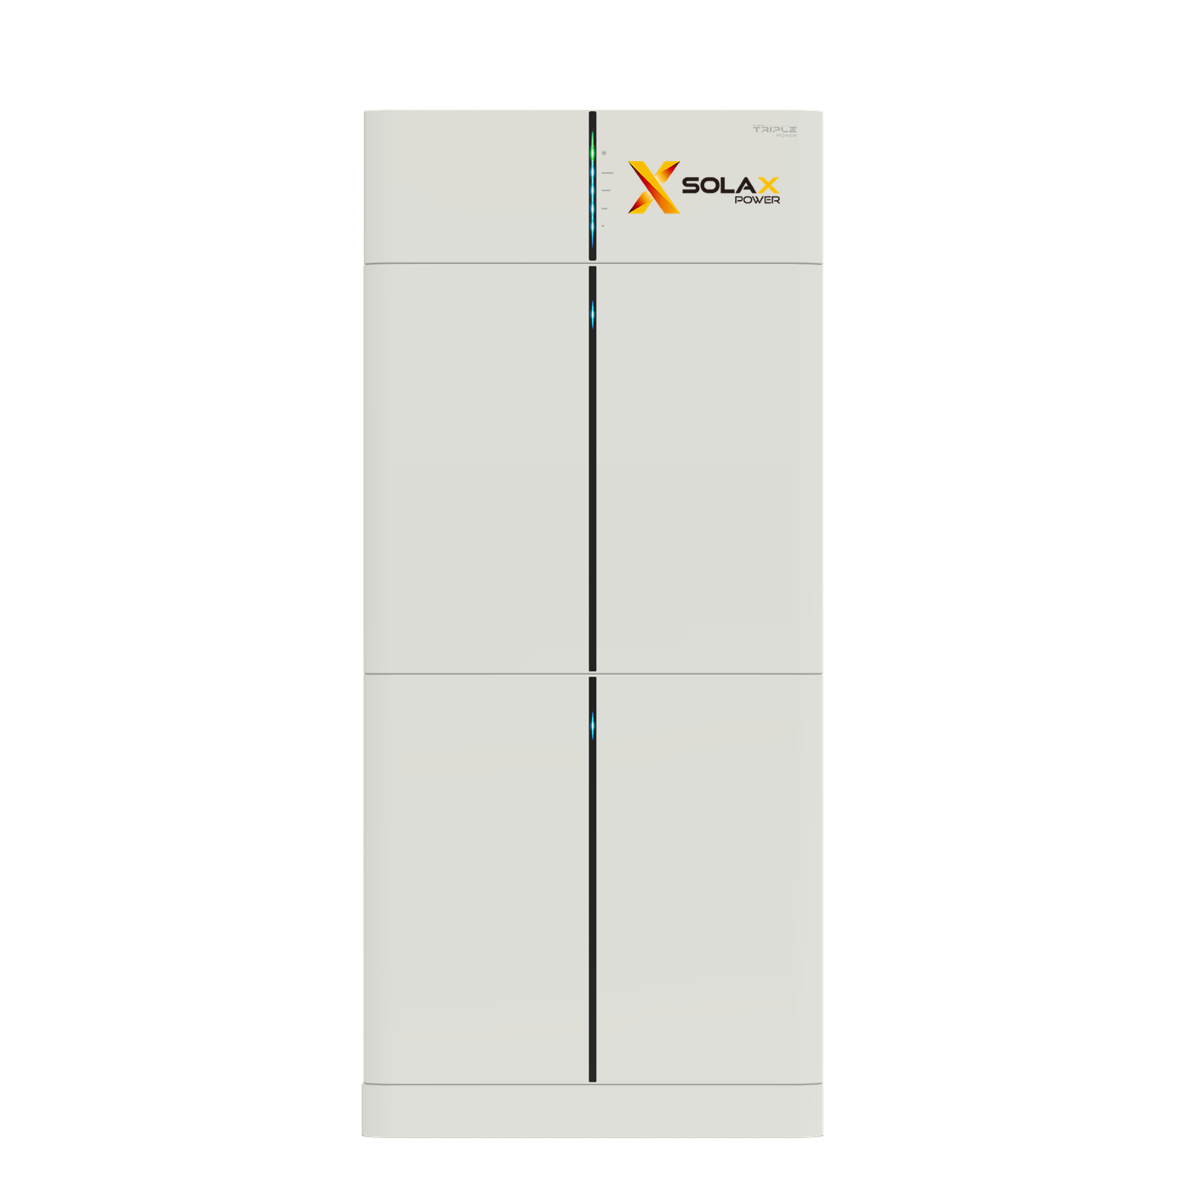 SOLAX - 6,2 kWh T3.0 POWER PACK - Auswahl